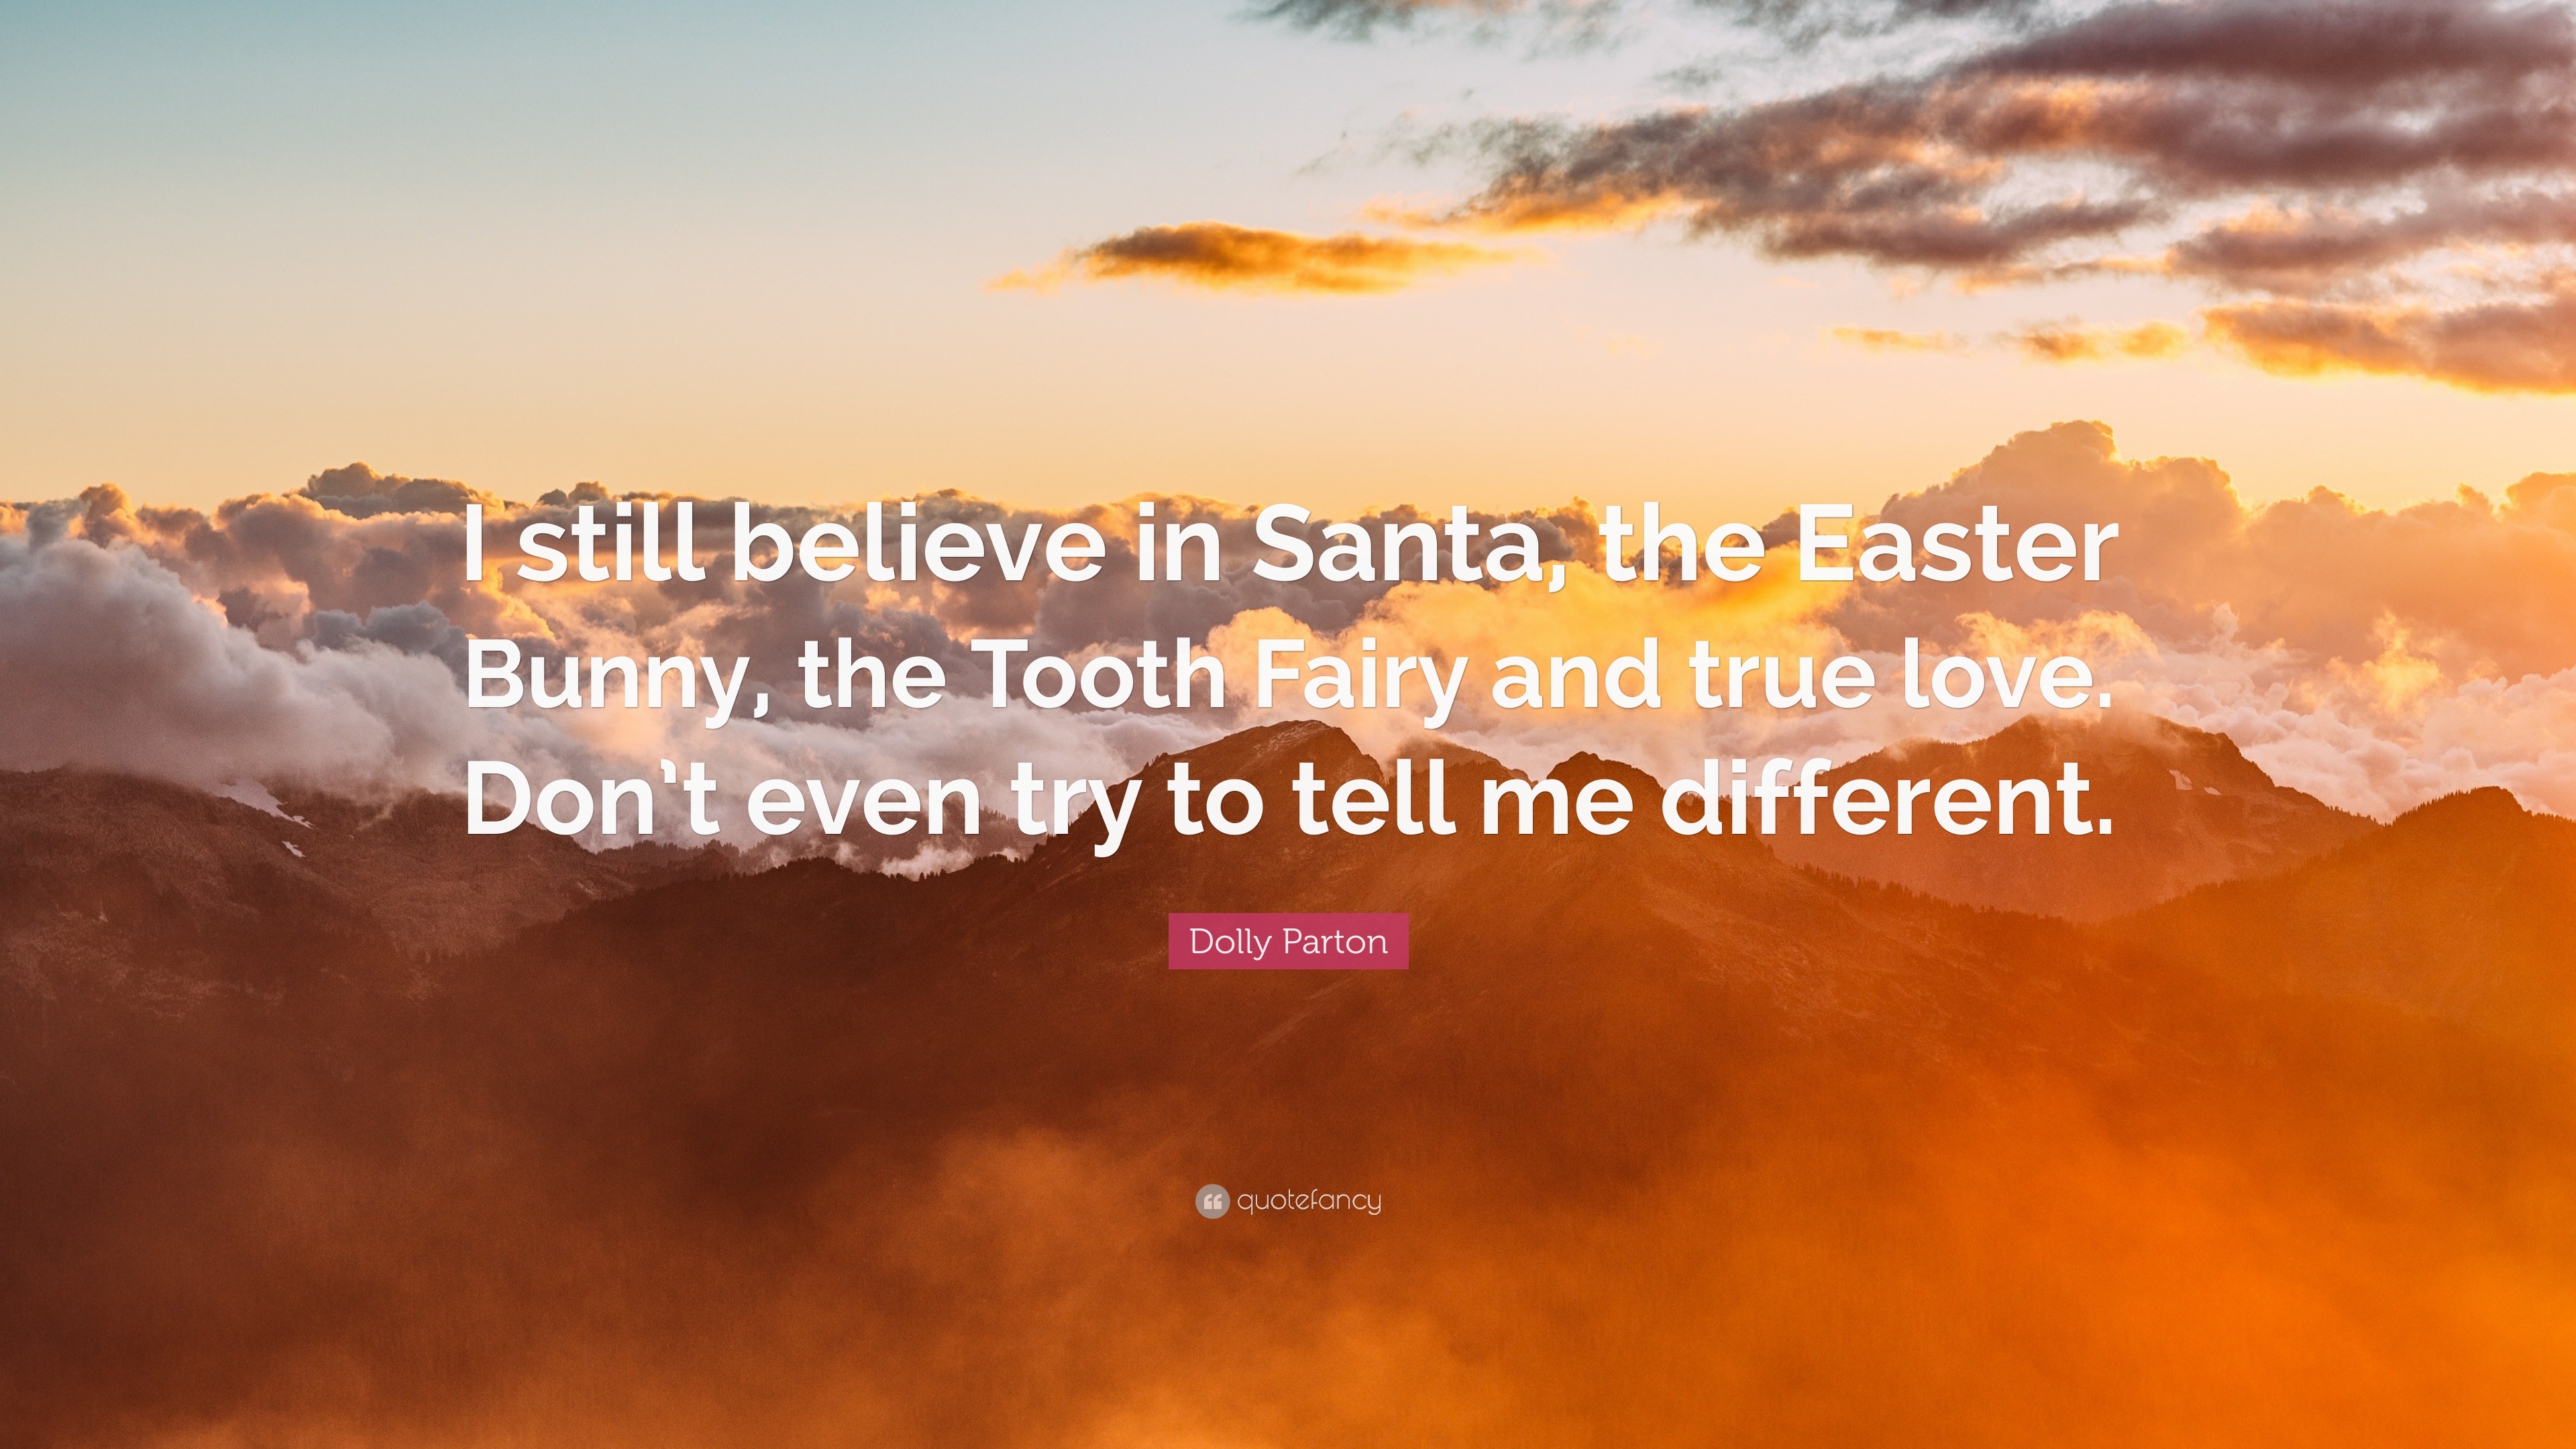 Dolly Parton Quote I Still Believe In Santa The Easter Bunny The Tooth Fairy And True